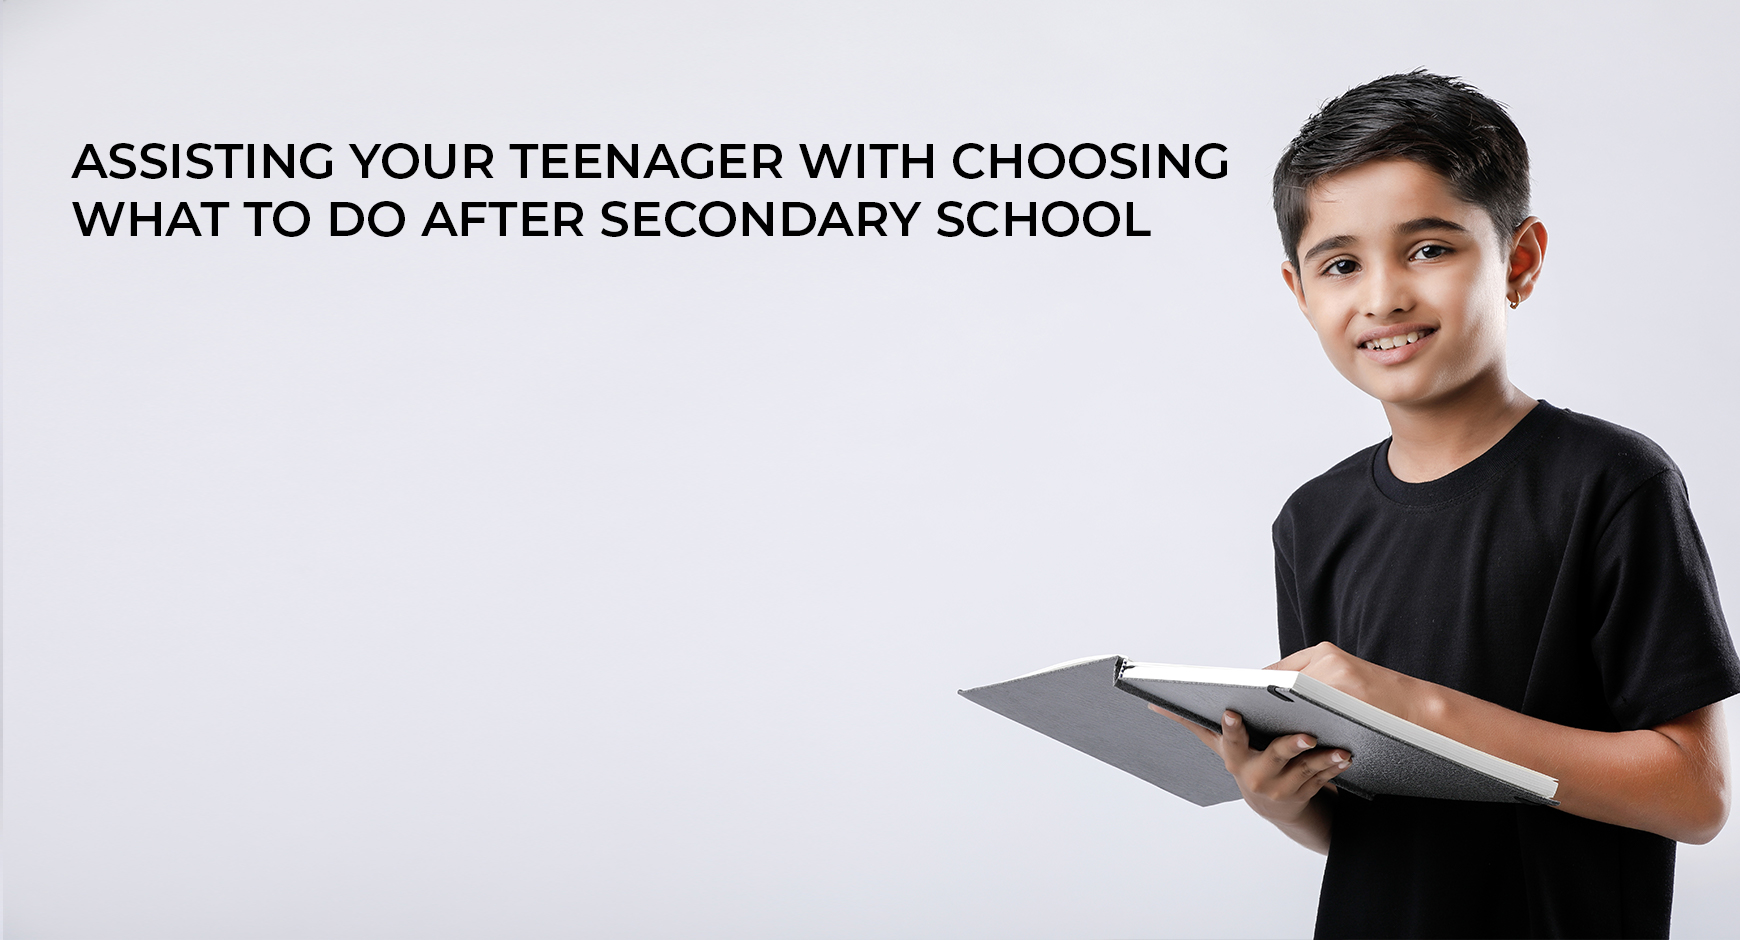 Assisting your teenager with choosing what to do after secondary school